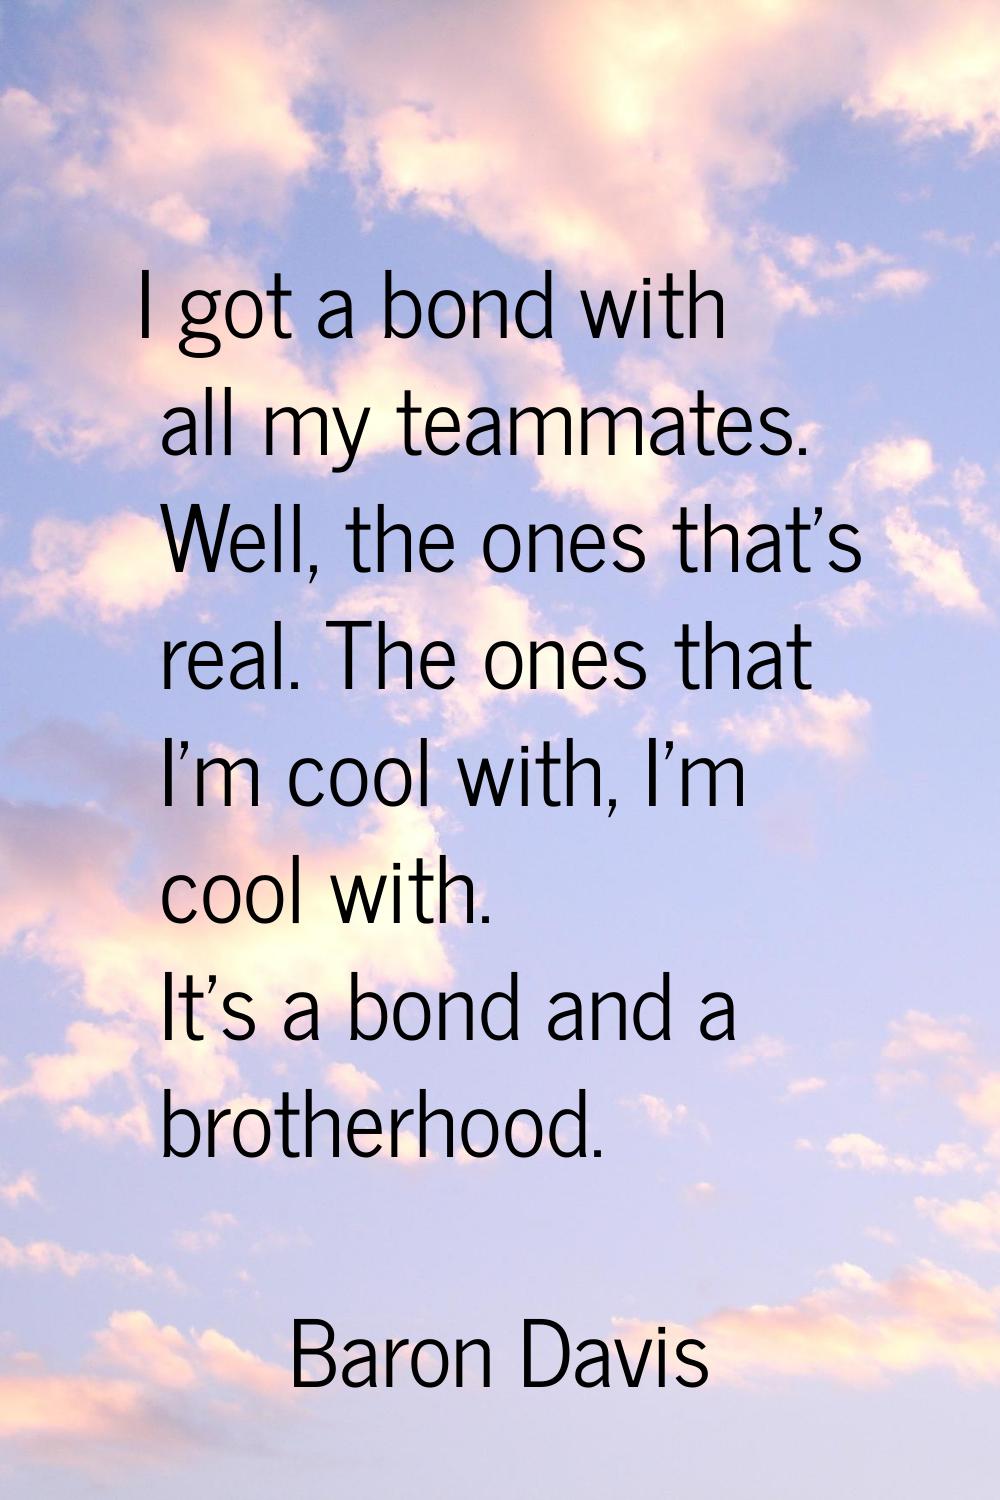 I got a bond with all my teammates. Well, the ones that's real. The ones that I'm cool with, I'm co